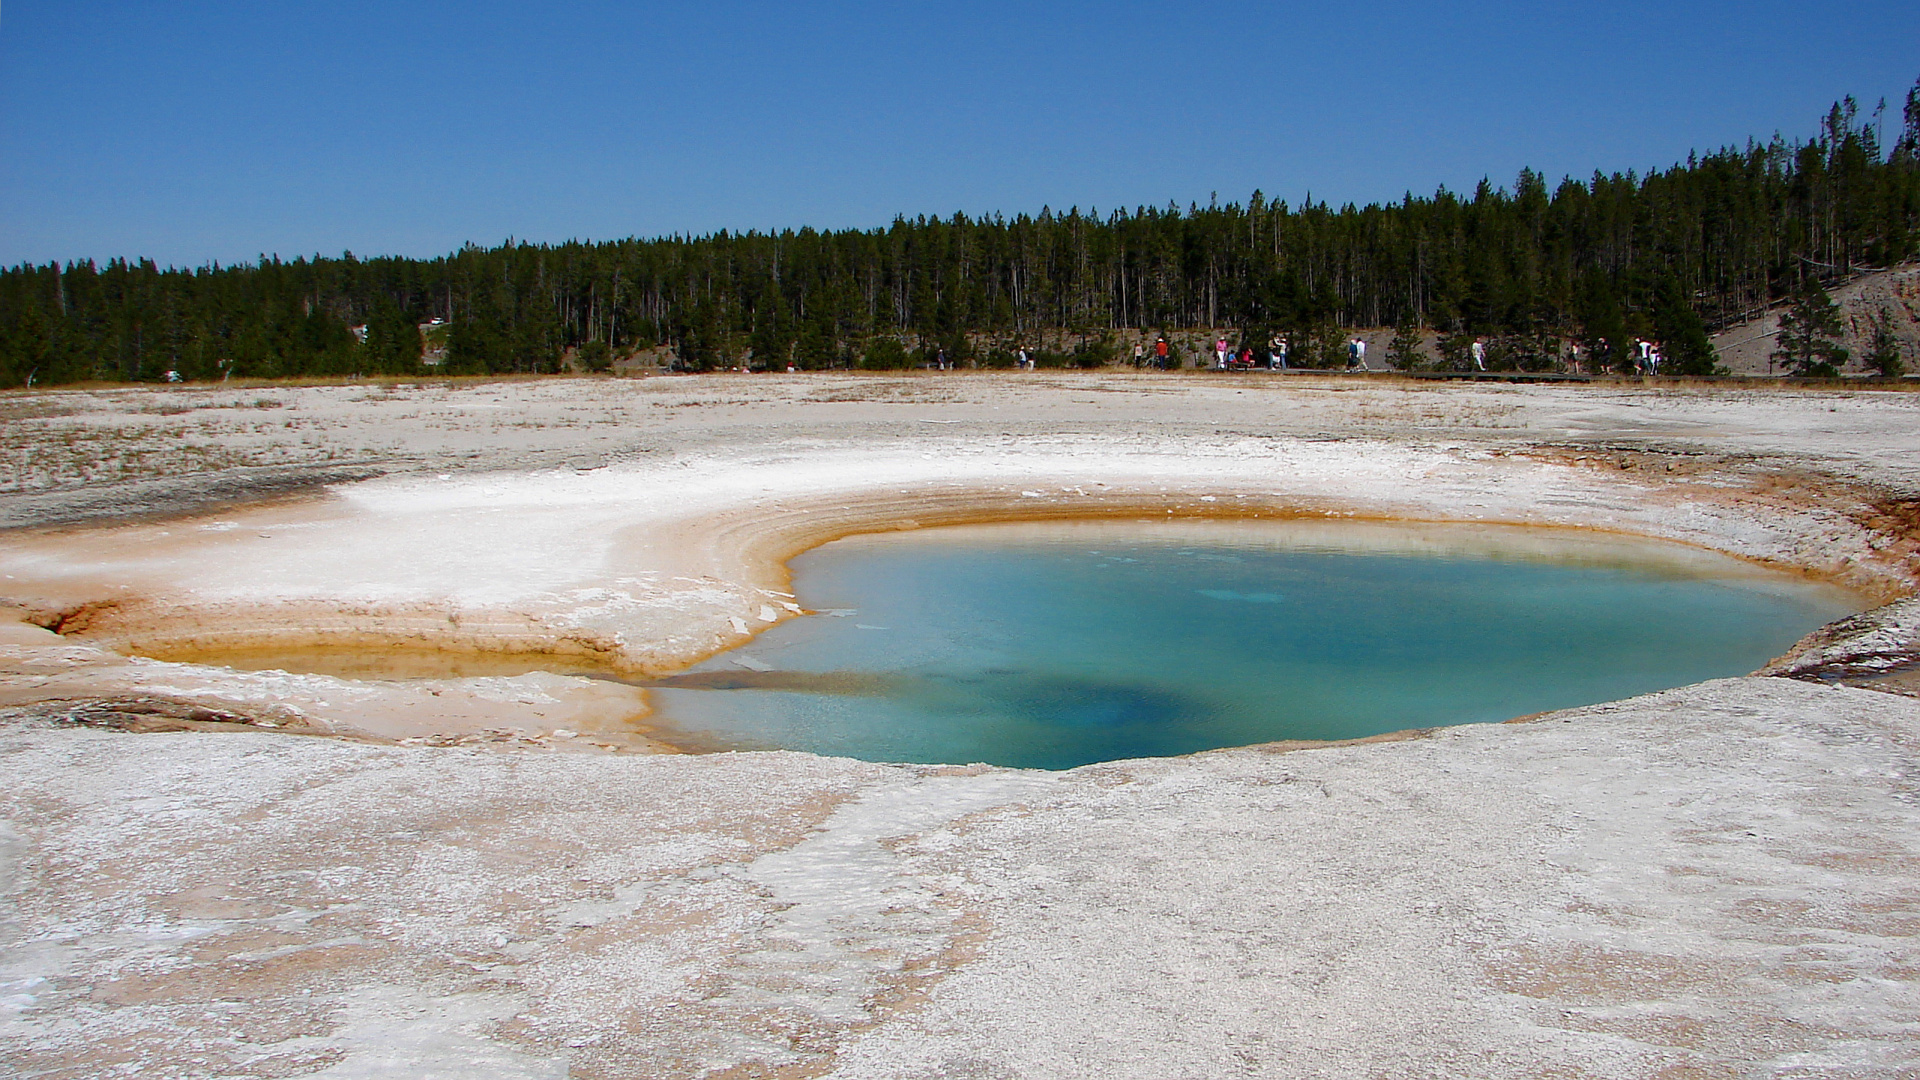 Turquoise Pool (Travels » US Trip 1: Cheyenne Country » The Journey » Yellowstone National Park » Geysers, Hot Springs and Lakes » Midway Geyser Basin)